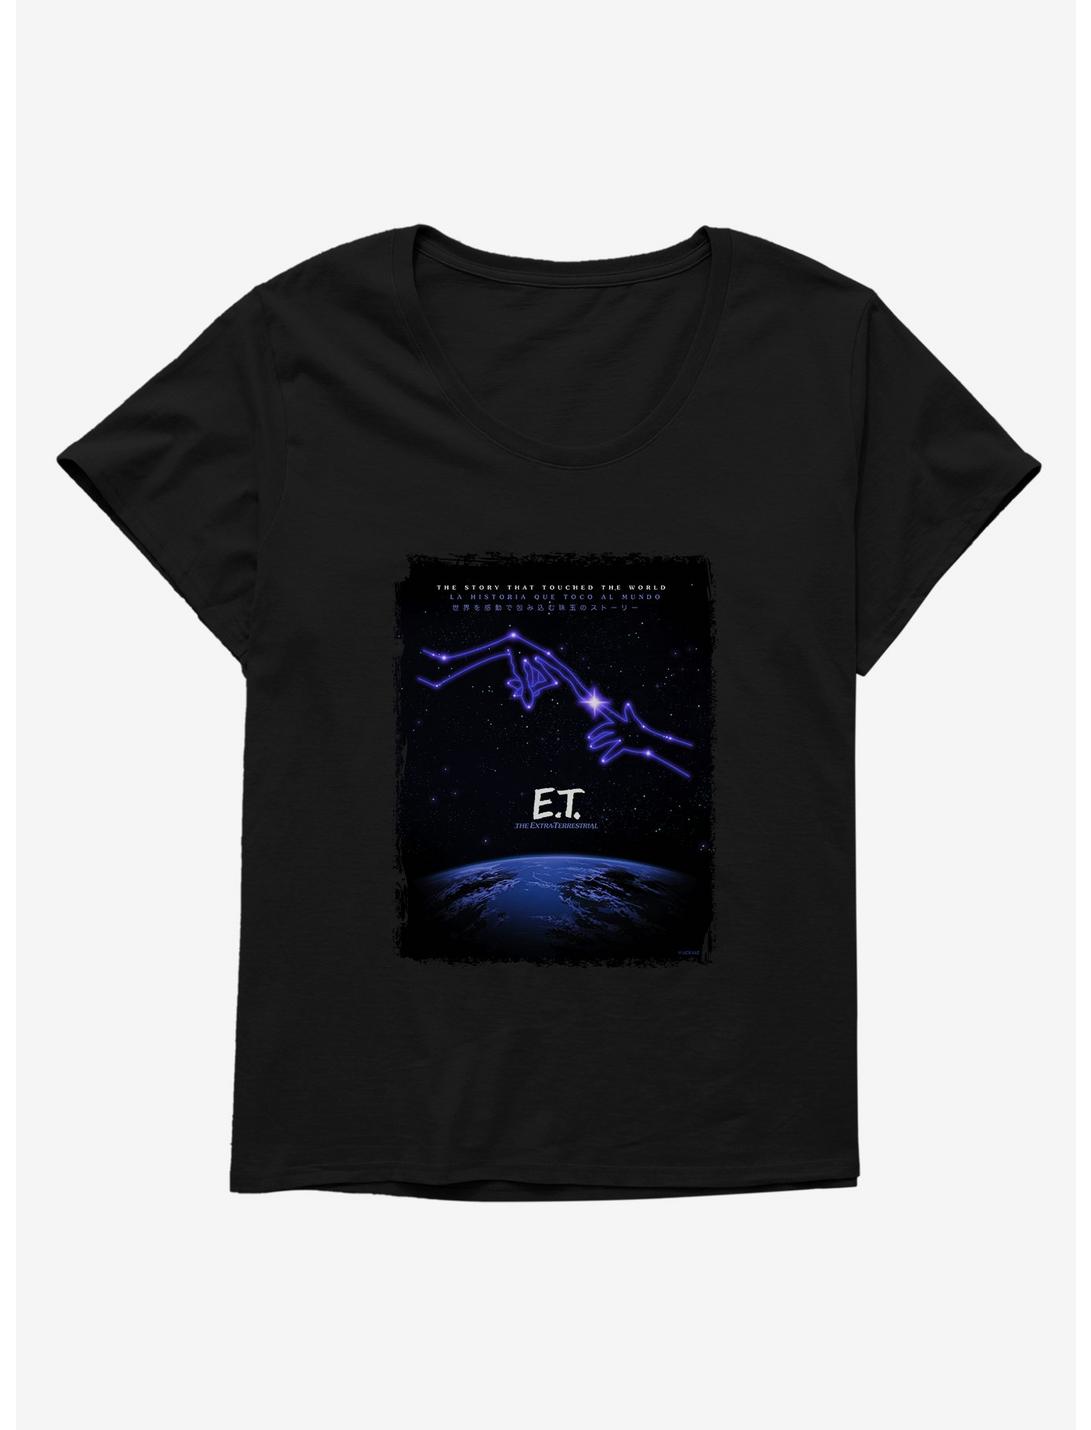 E.T. 40th Anniversary The Story That Touched The World Girls T-Shirt Plus Size, , hi-res